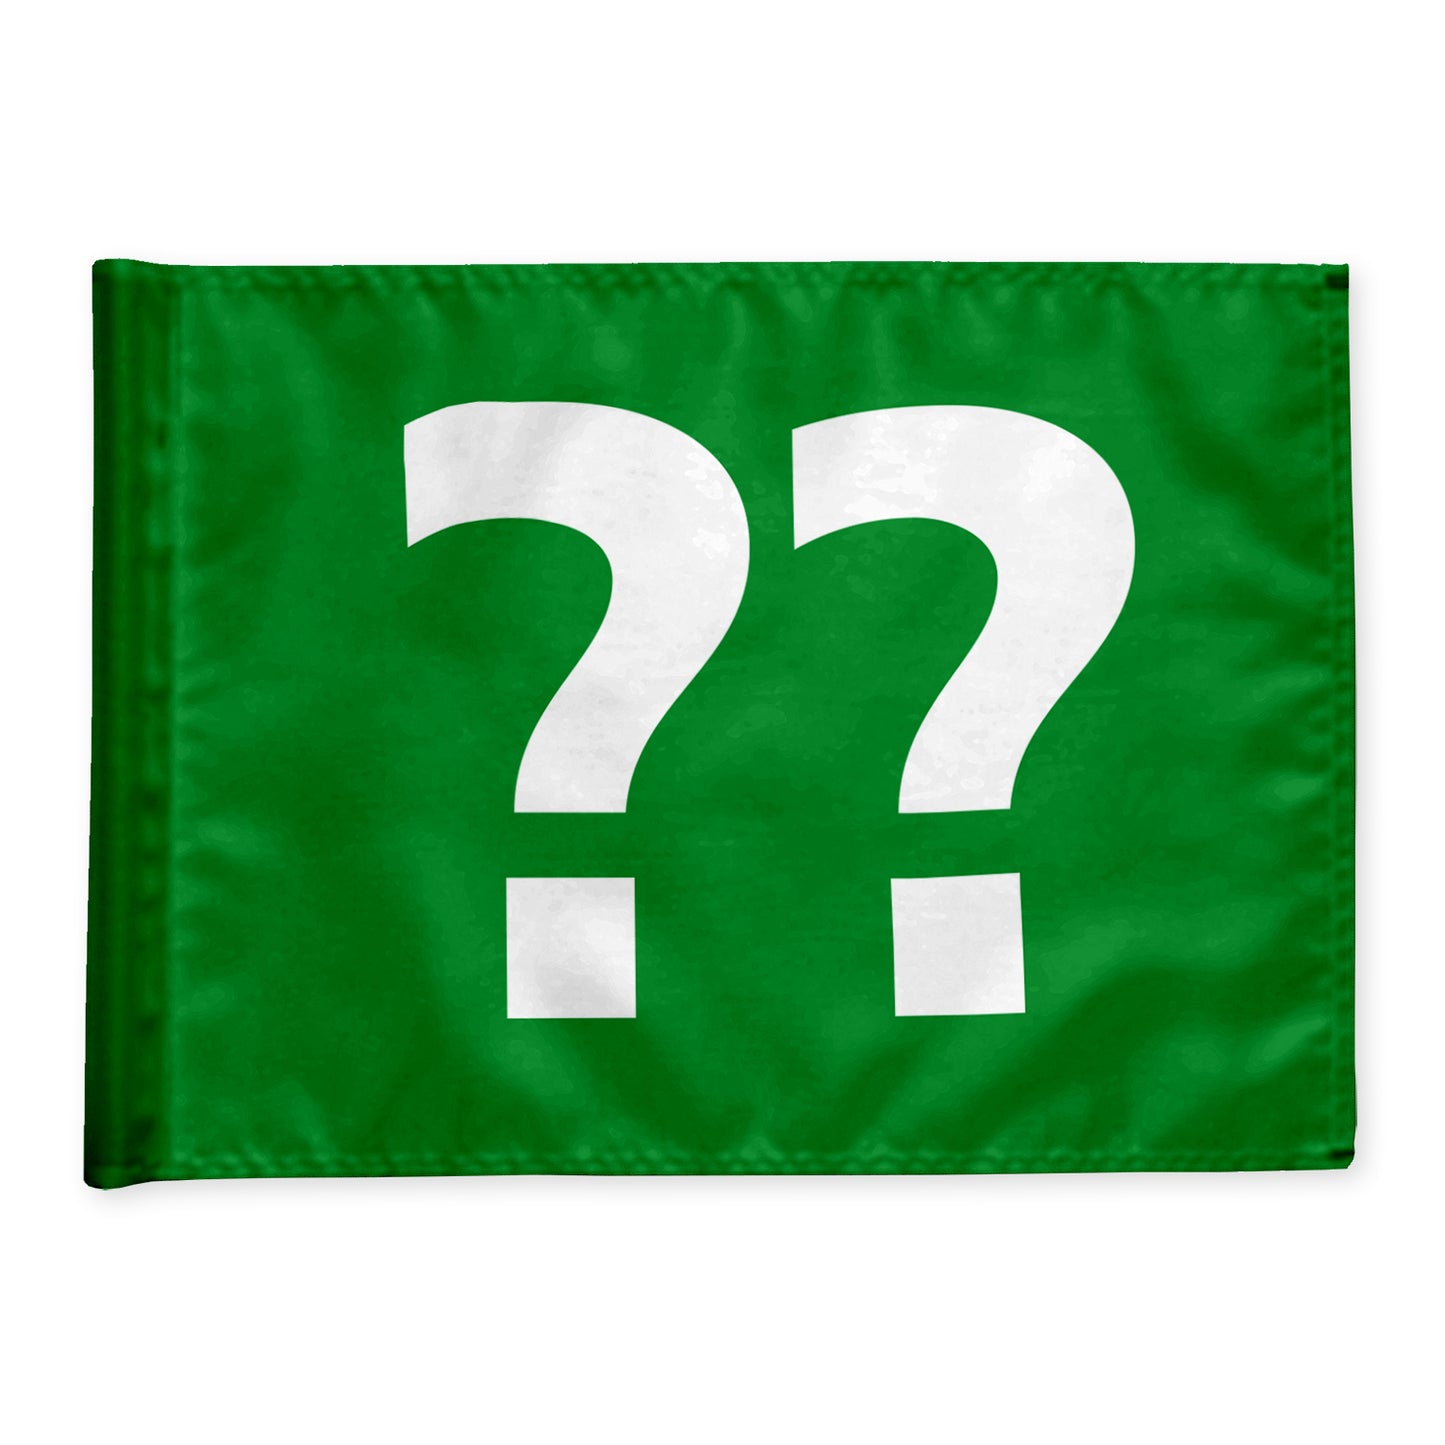 Single golf flag, green with optional hole number, 200 gram fabric